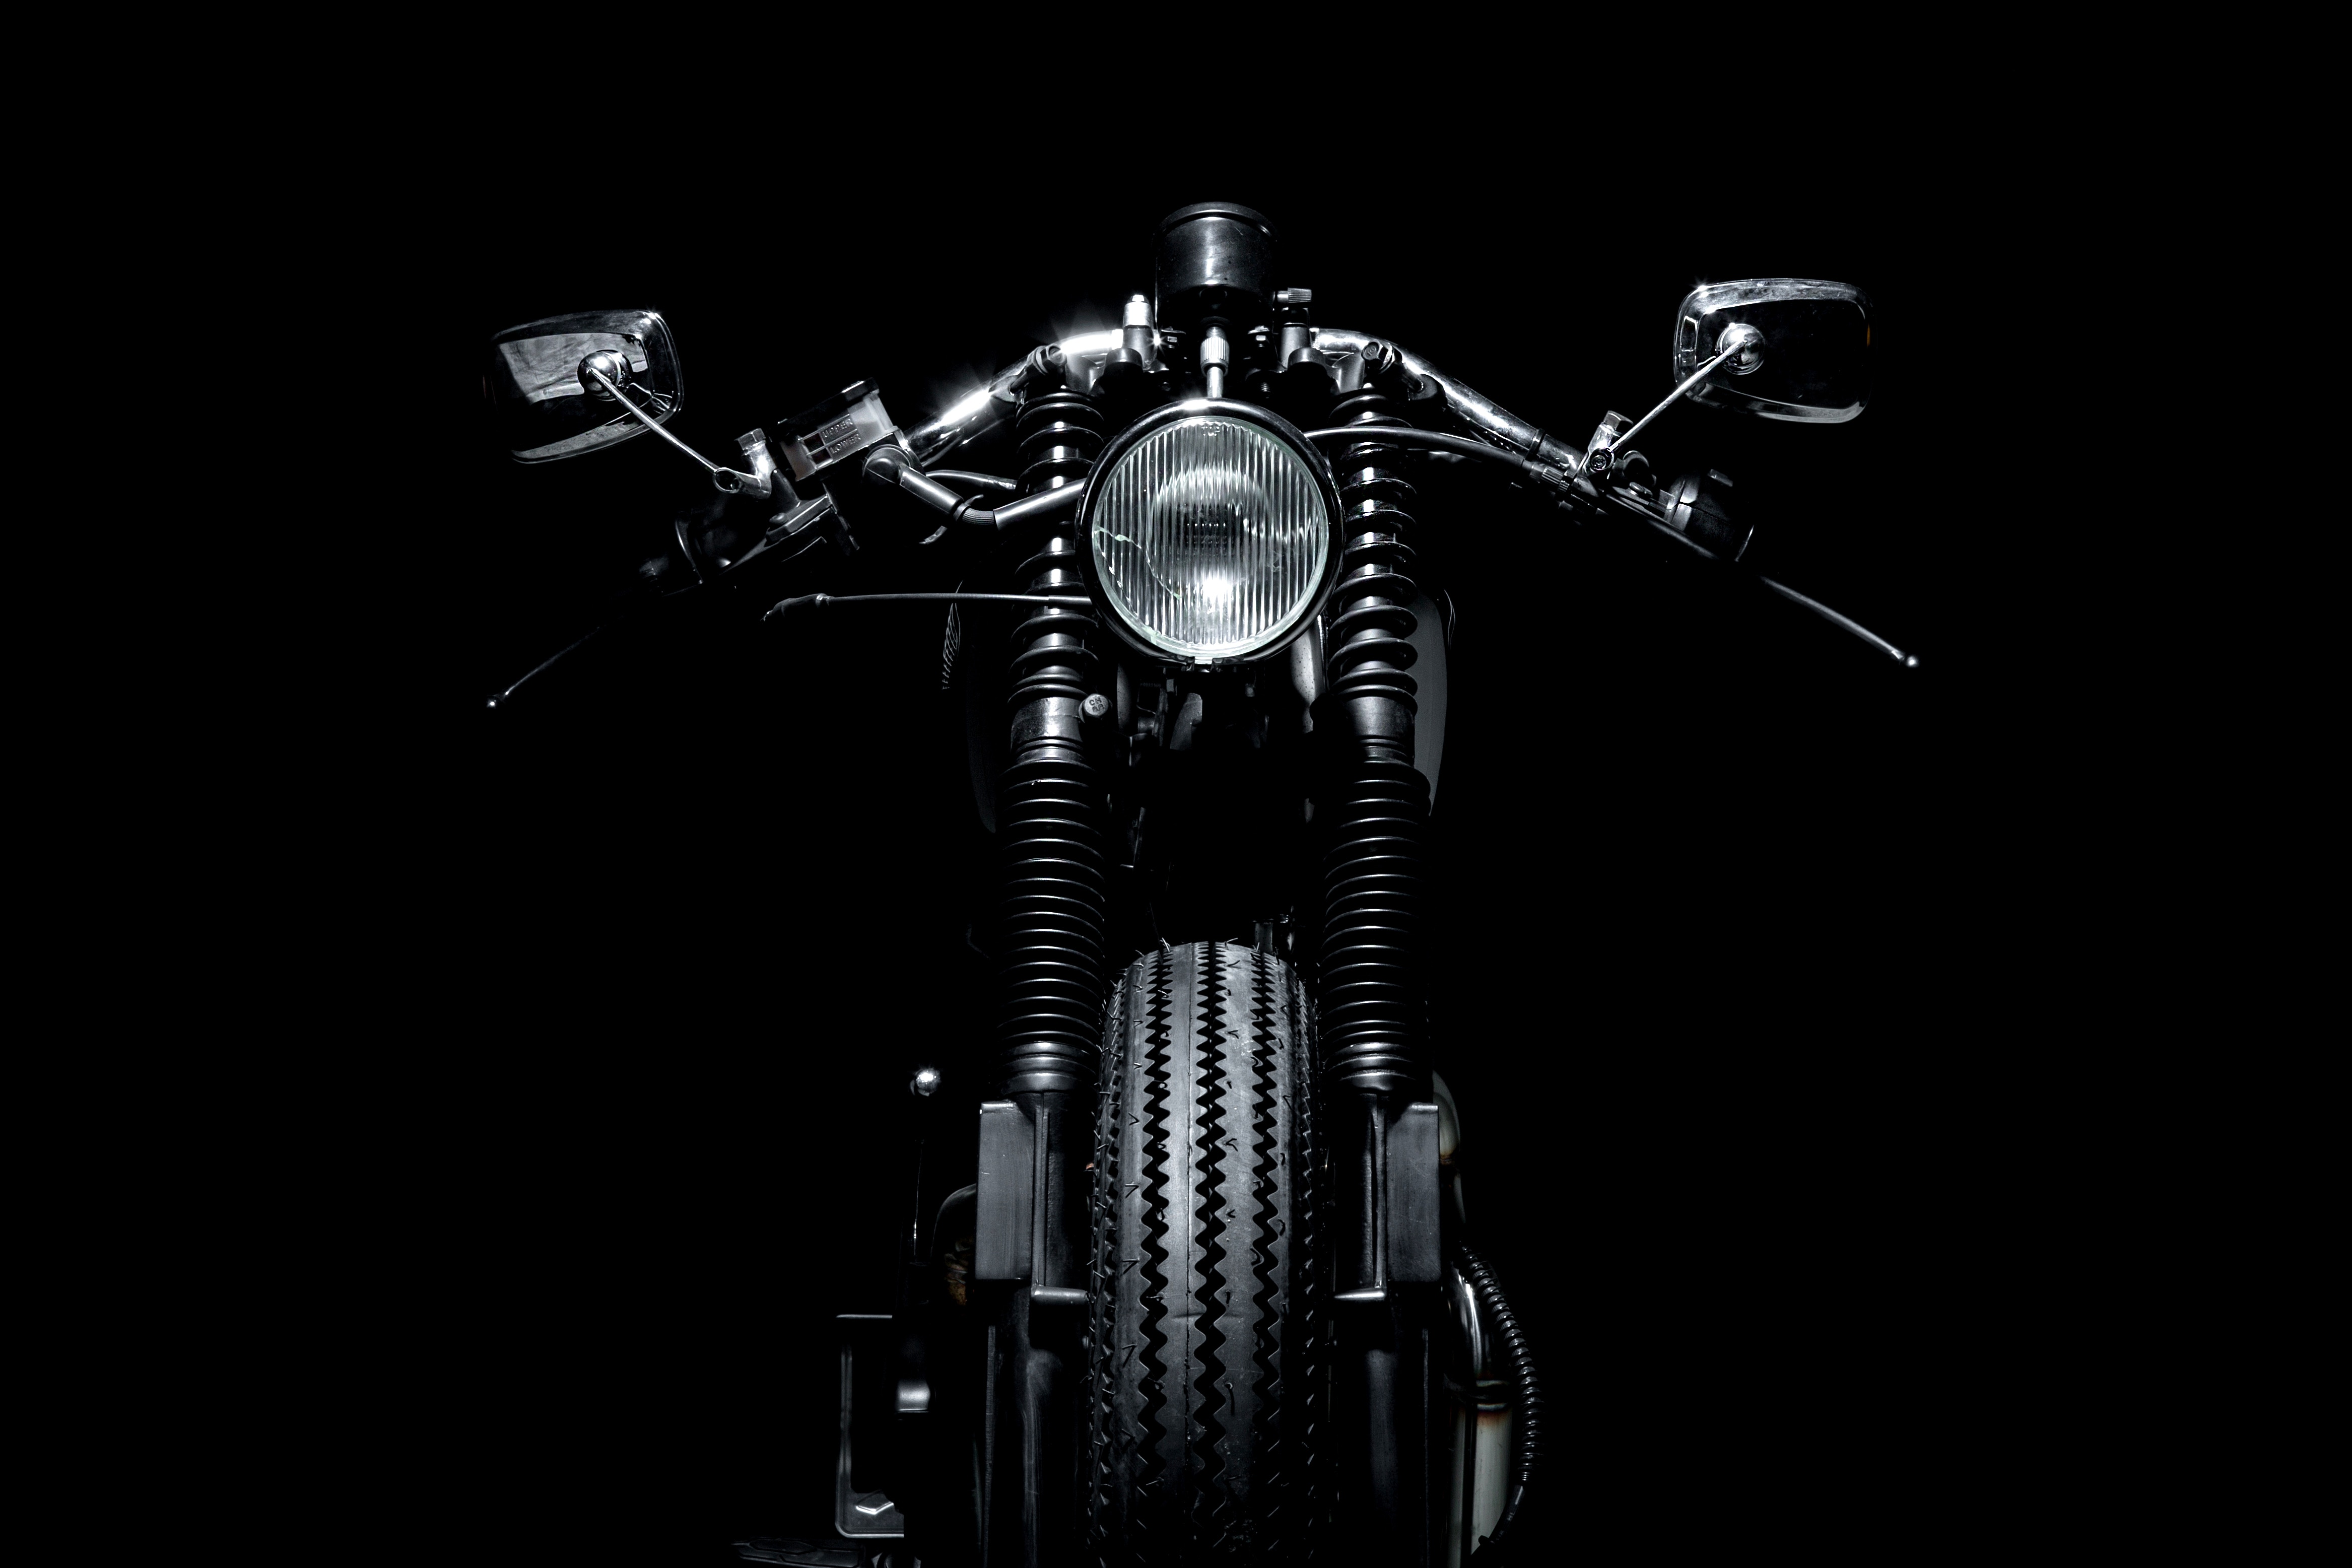 motorcycles, chb, tire, bw, motorcycle, headlight, tyre Full HD